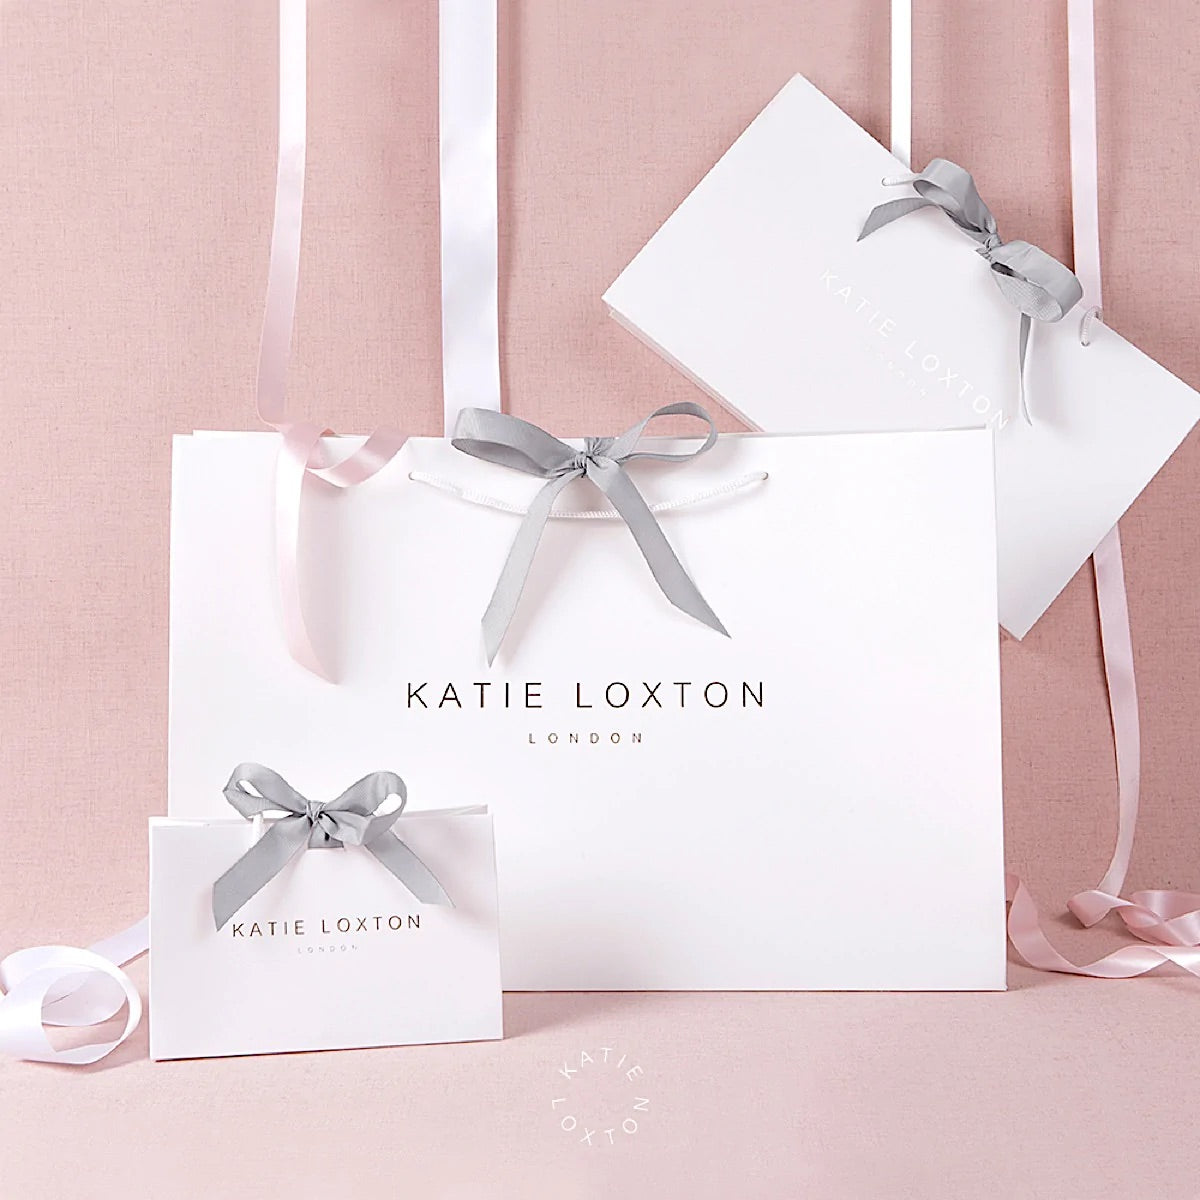 Katie Loxton Sentiment Candle - Every Day is Wonderful Mum -Peach Rose & Sweet Mandarin